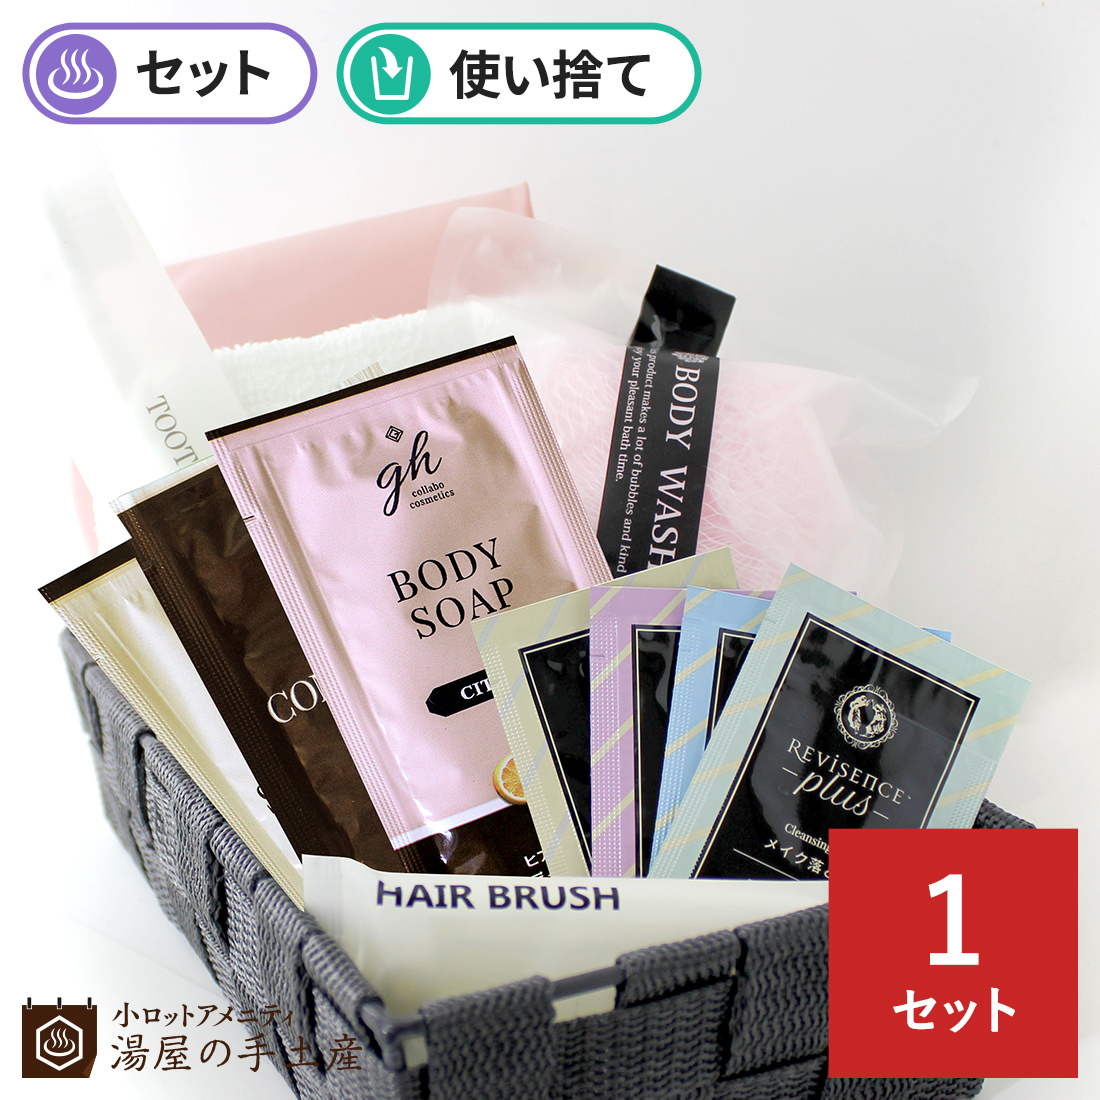 SALE／104%OFF】 アメニティセット 旅行用